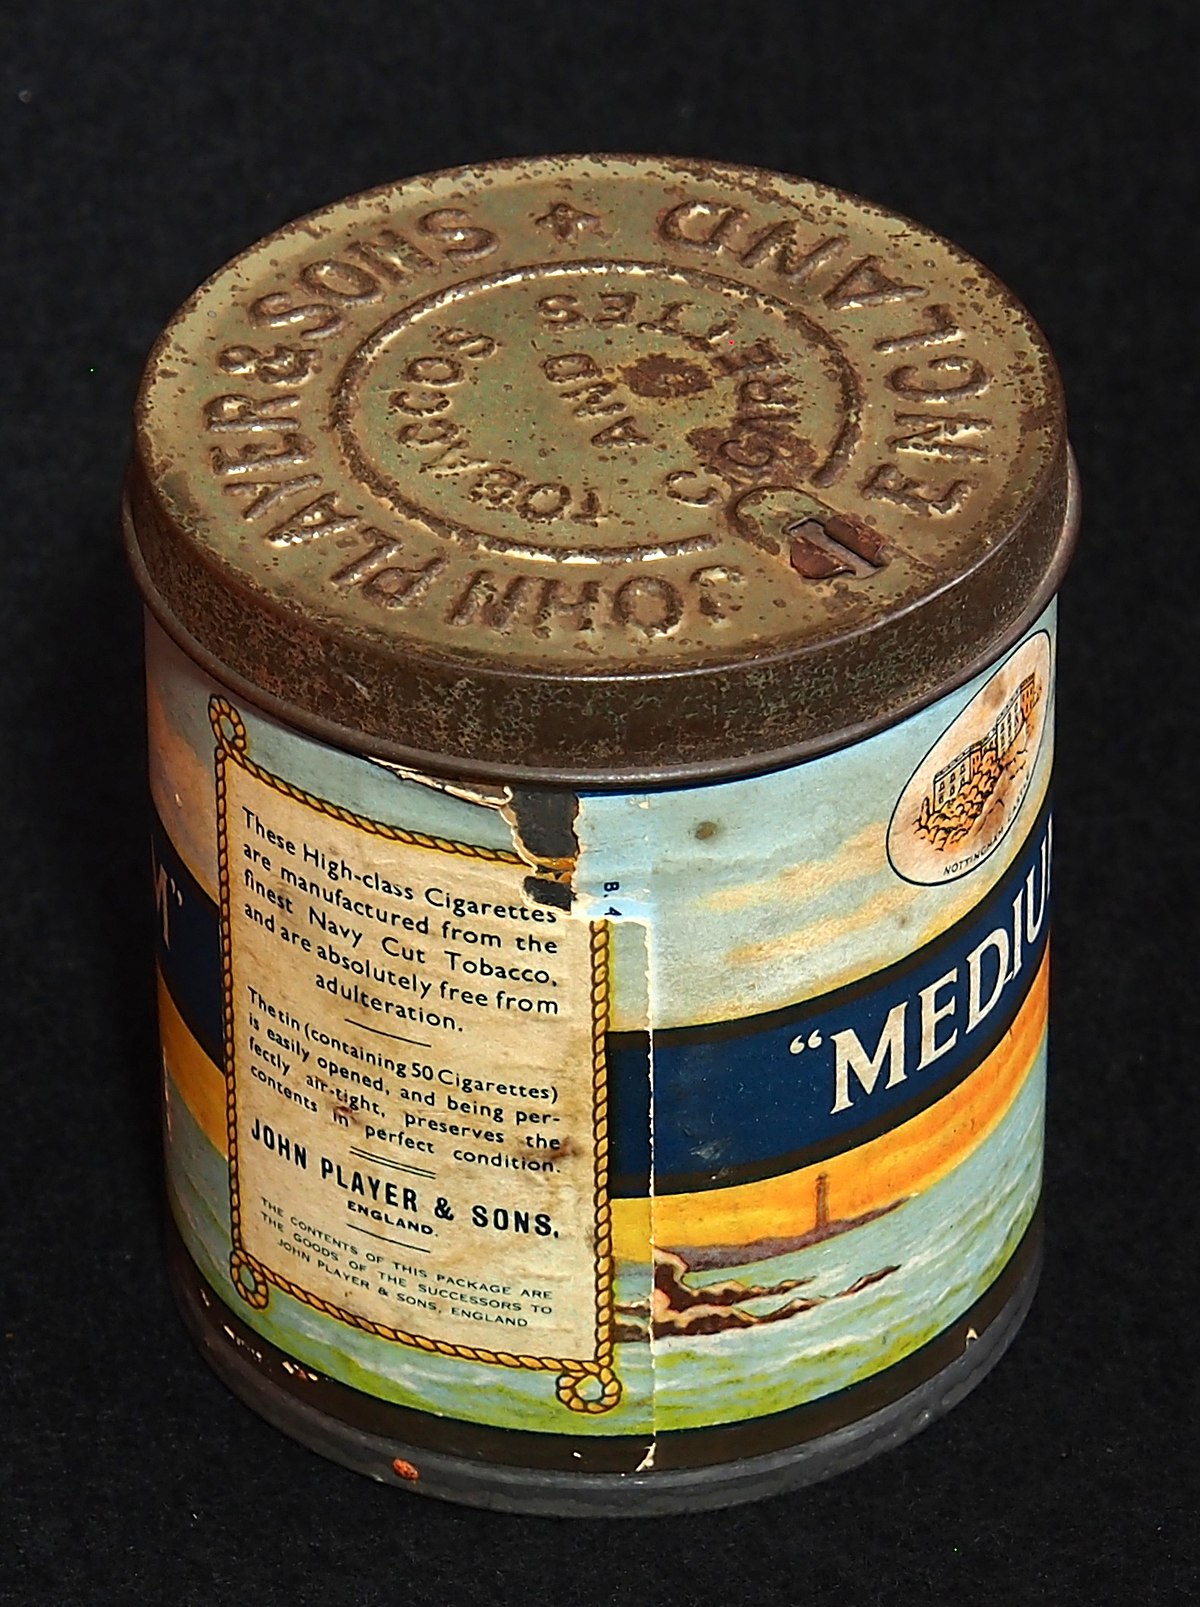 File:Package of John Player & Sons Navy Cut Tabacco, cigarettes.JPG -  Wikimedia Commons